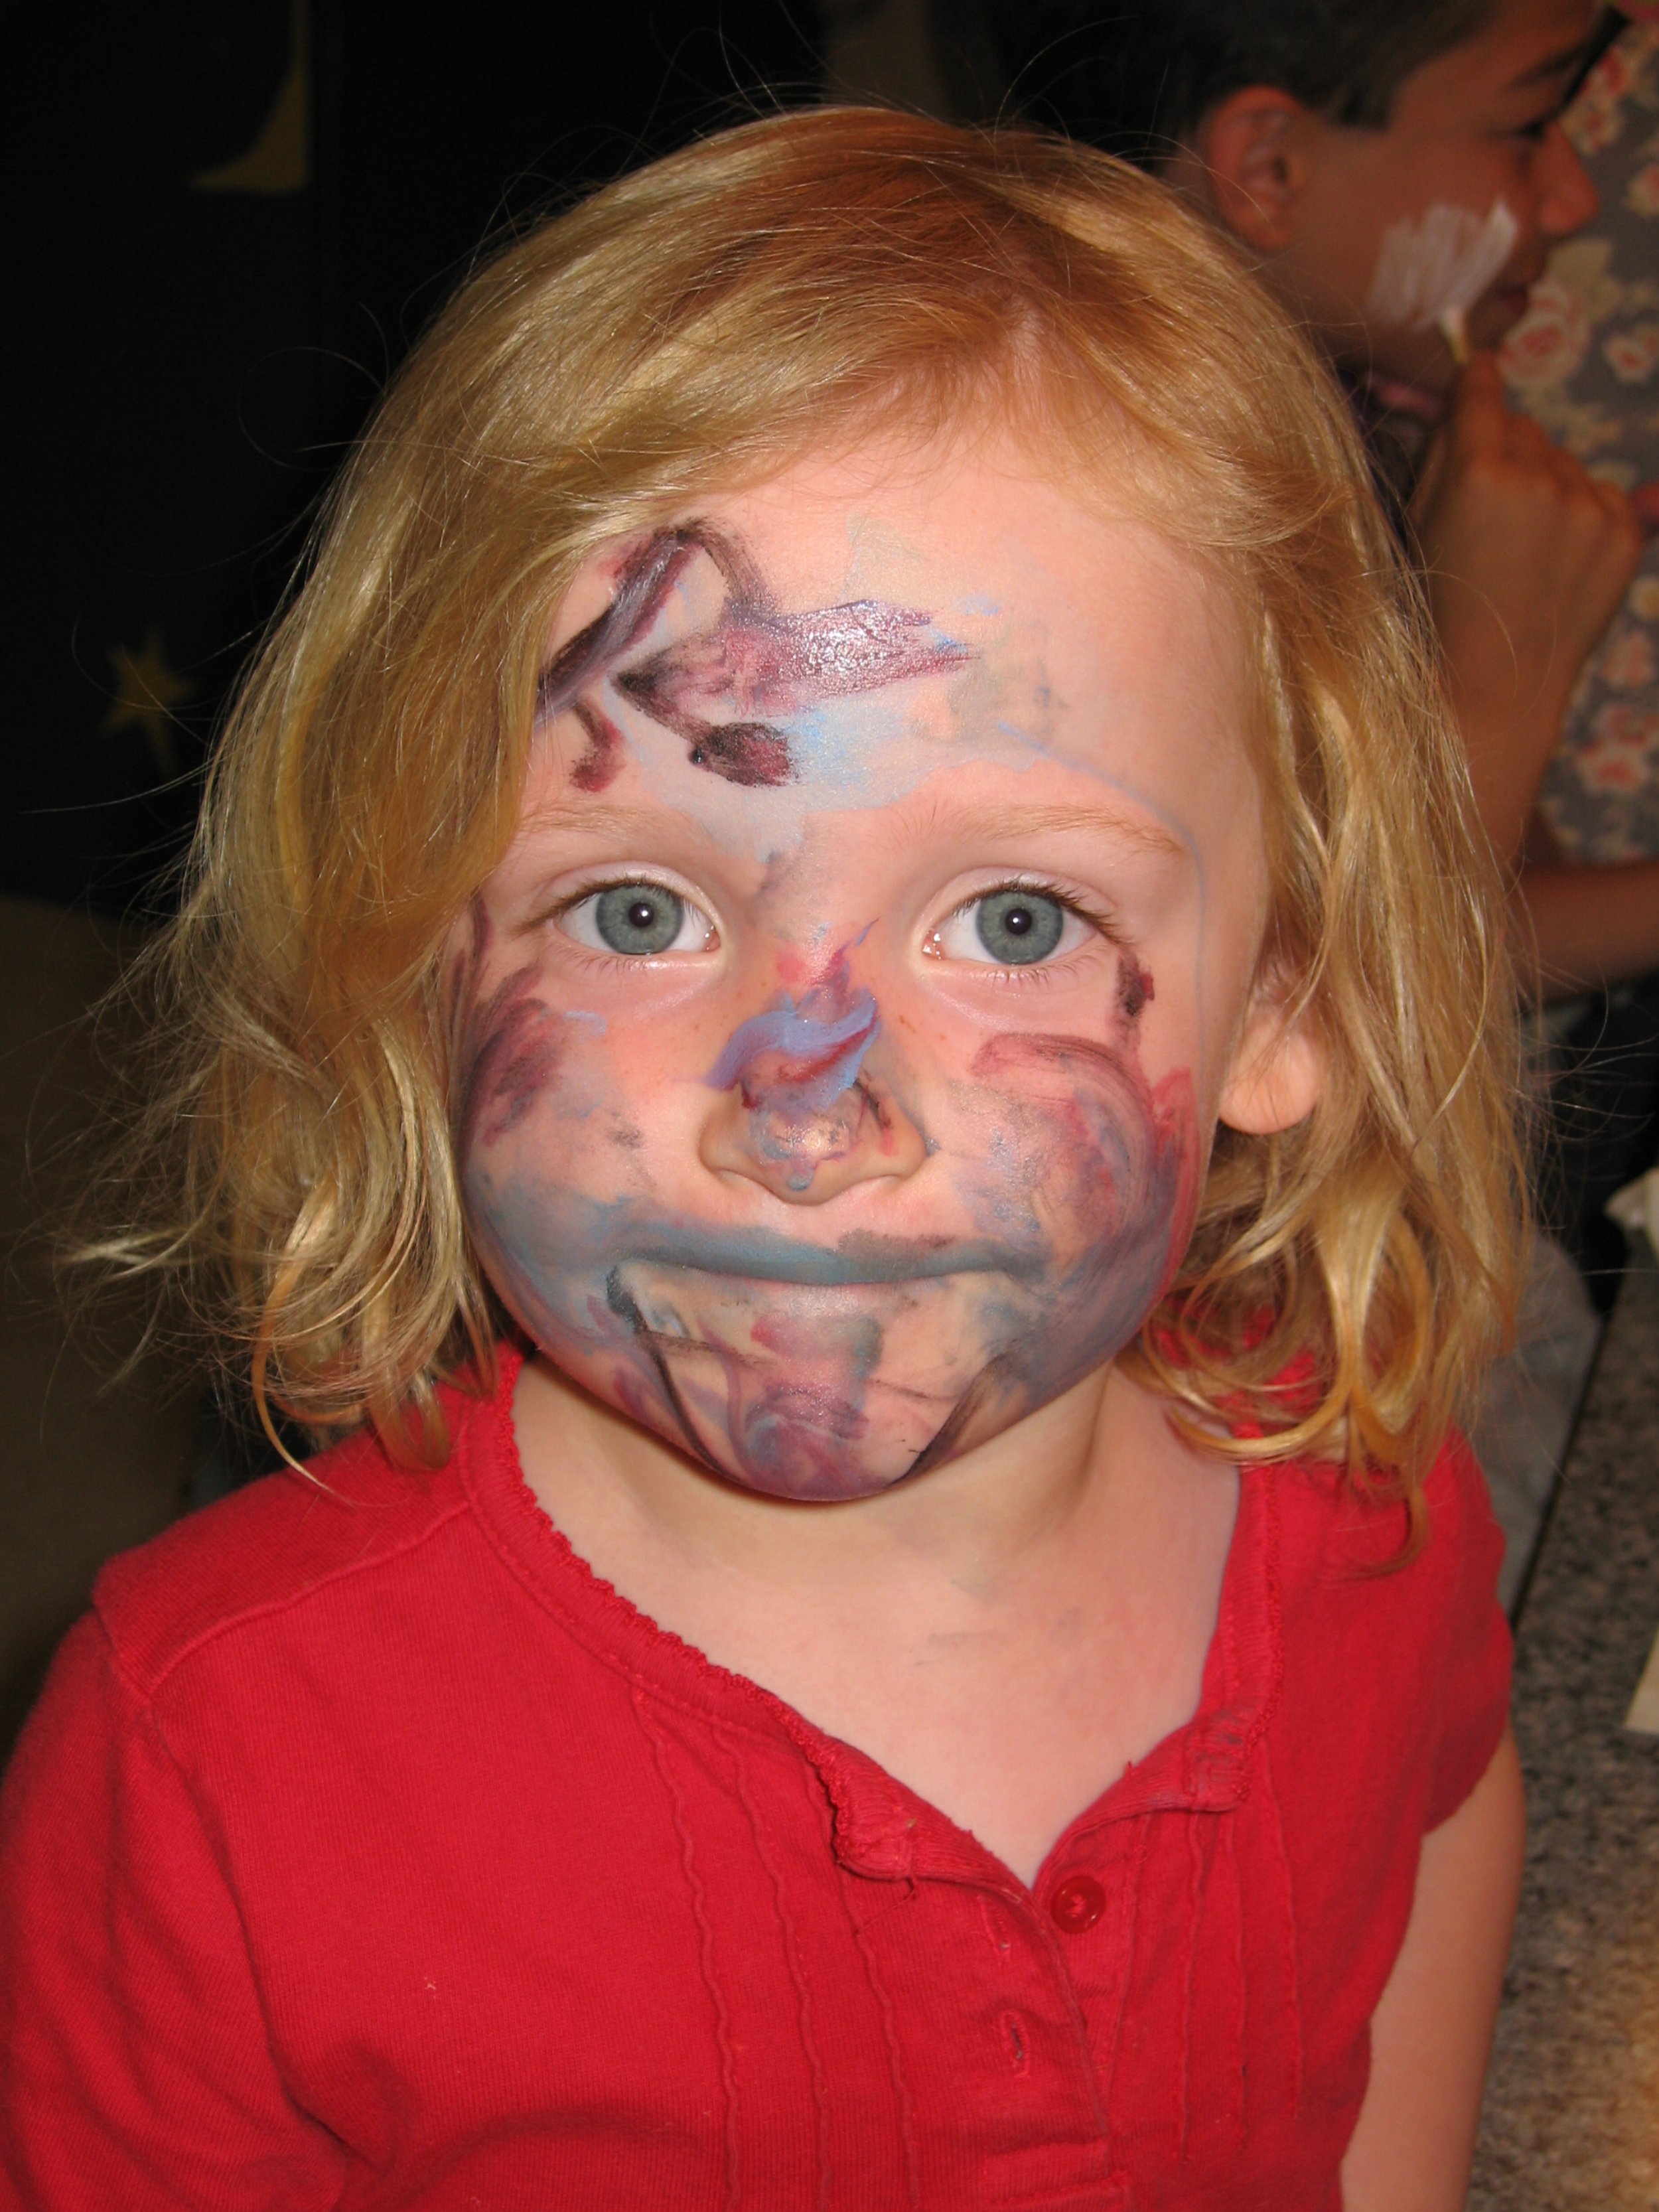  Fun with face paint! 